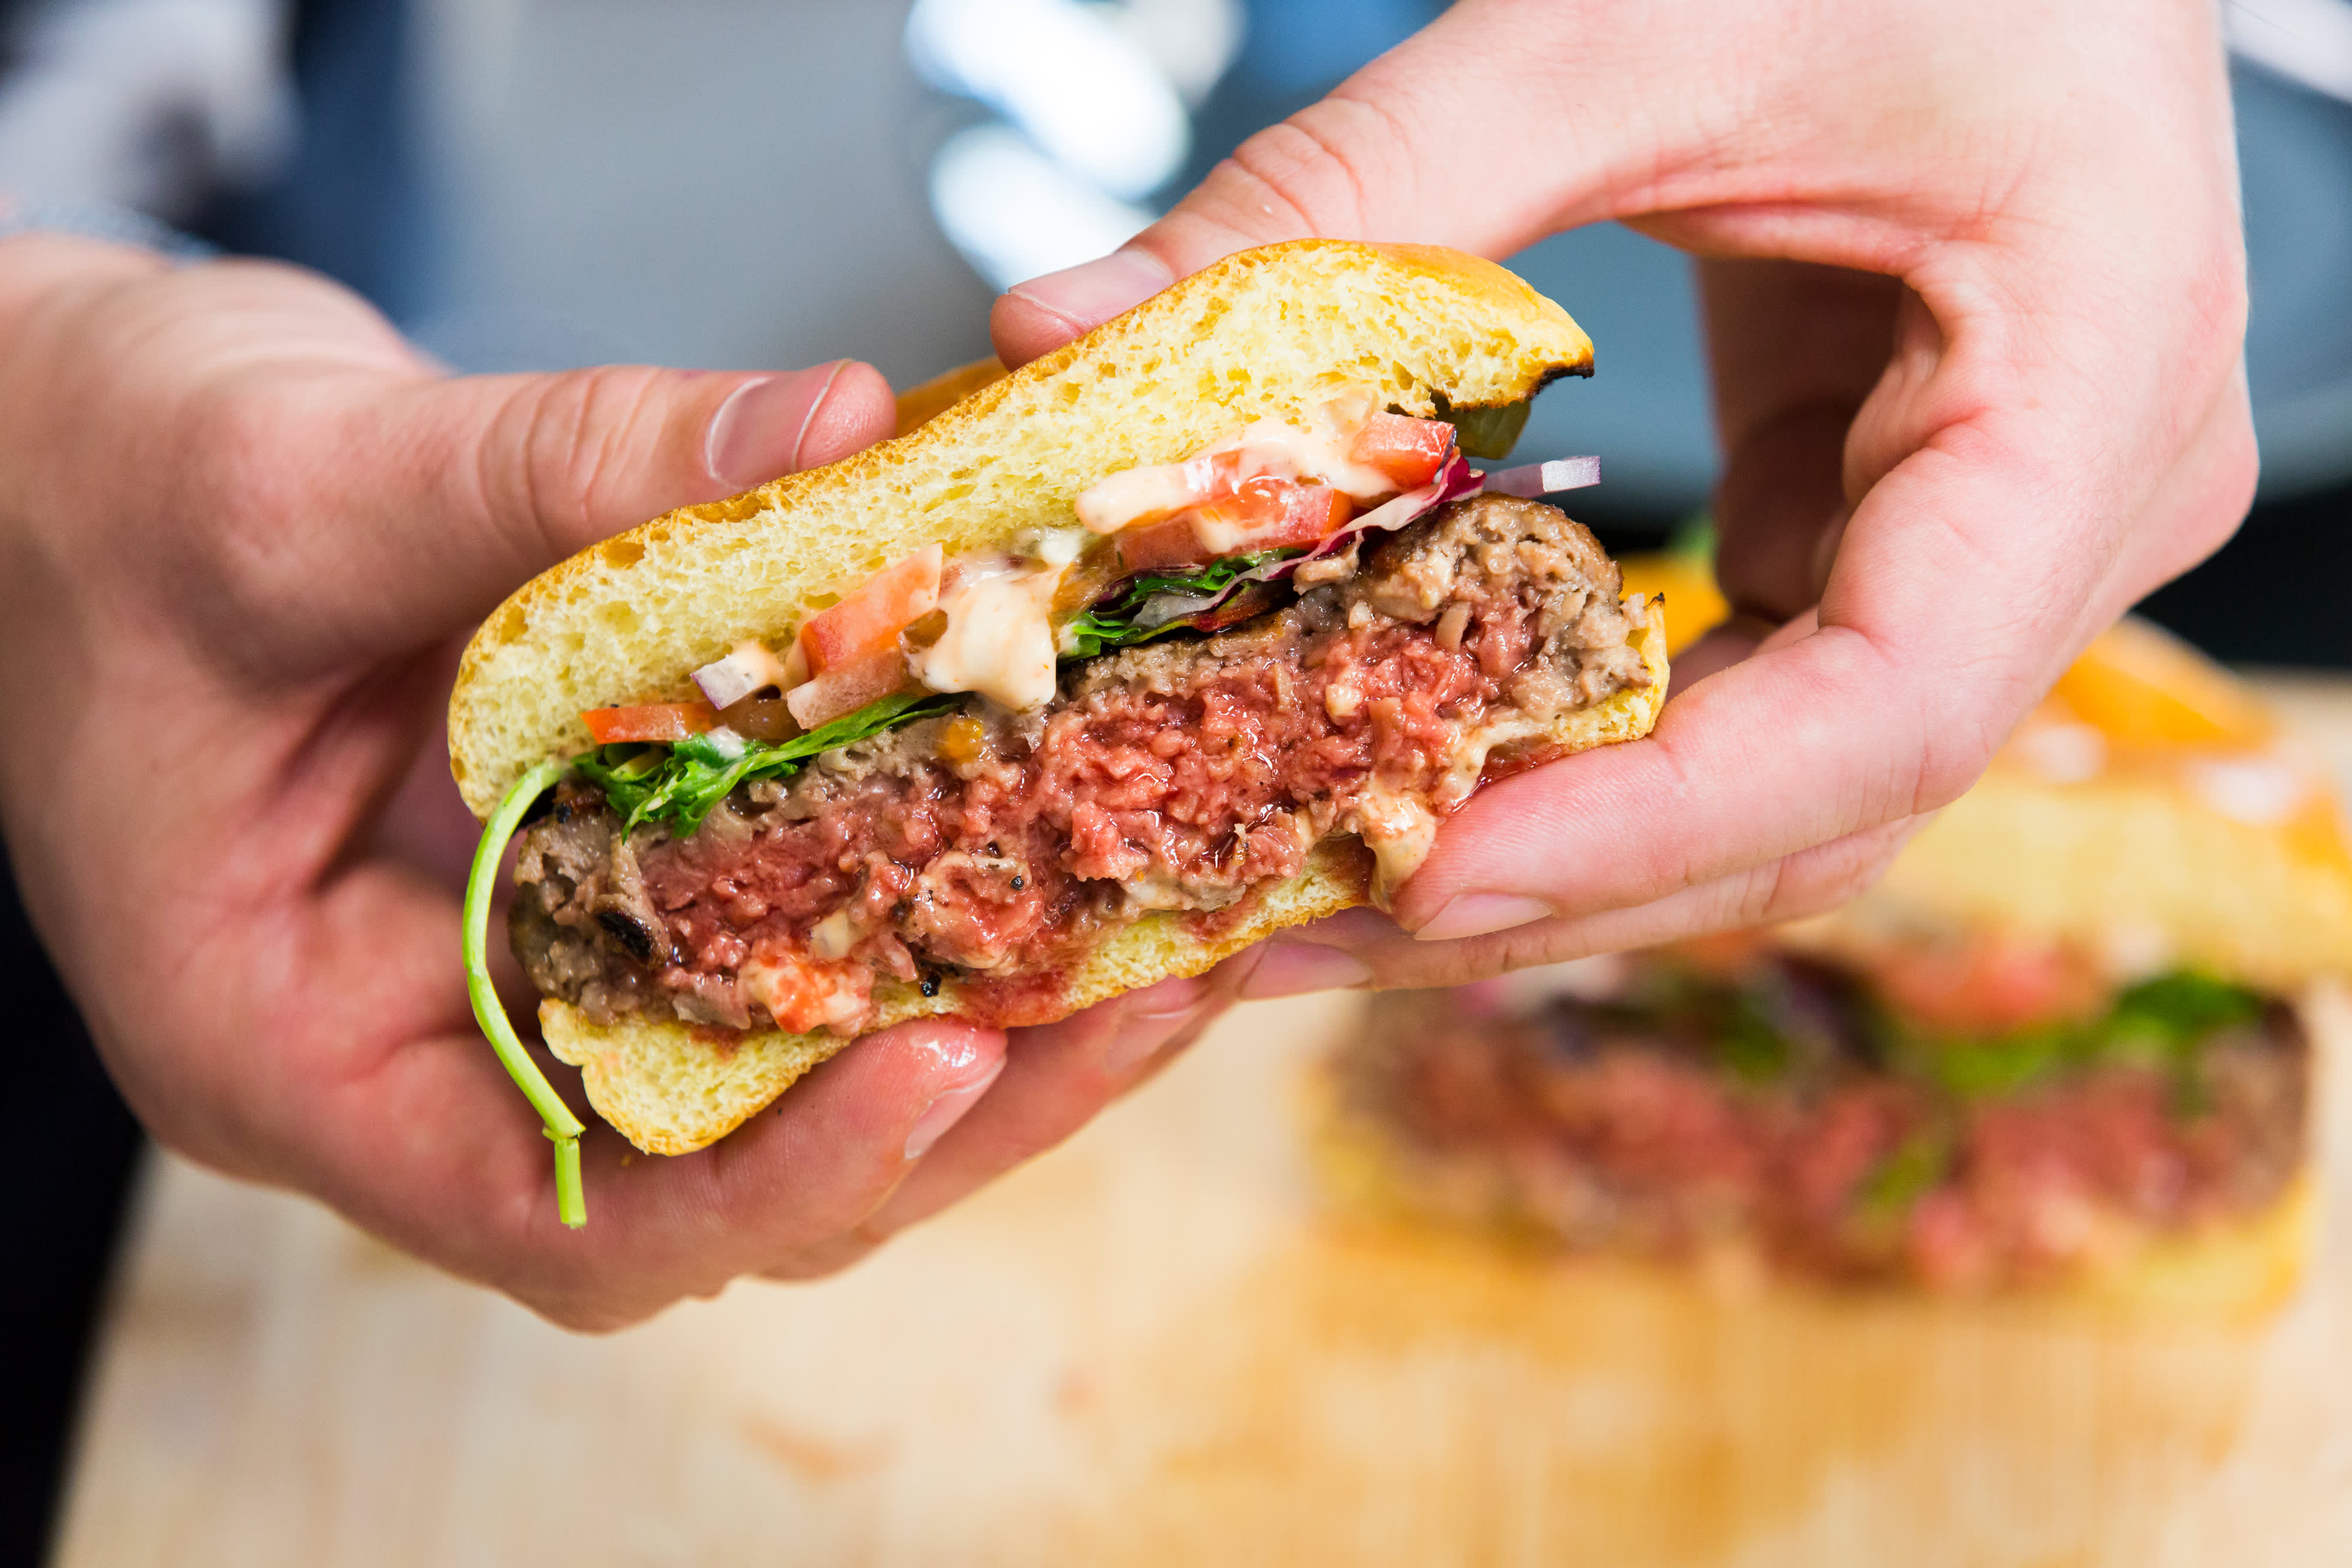 Impossible Foods reduces food distributor prices by an average of 15%